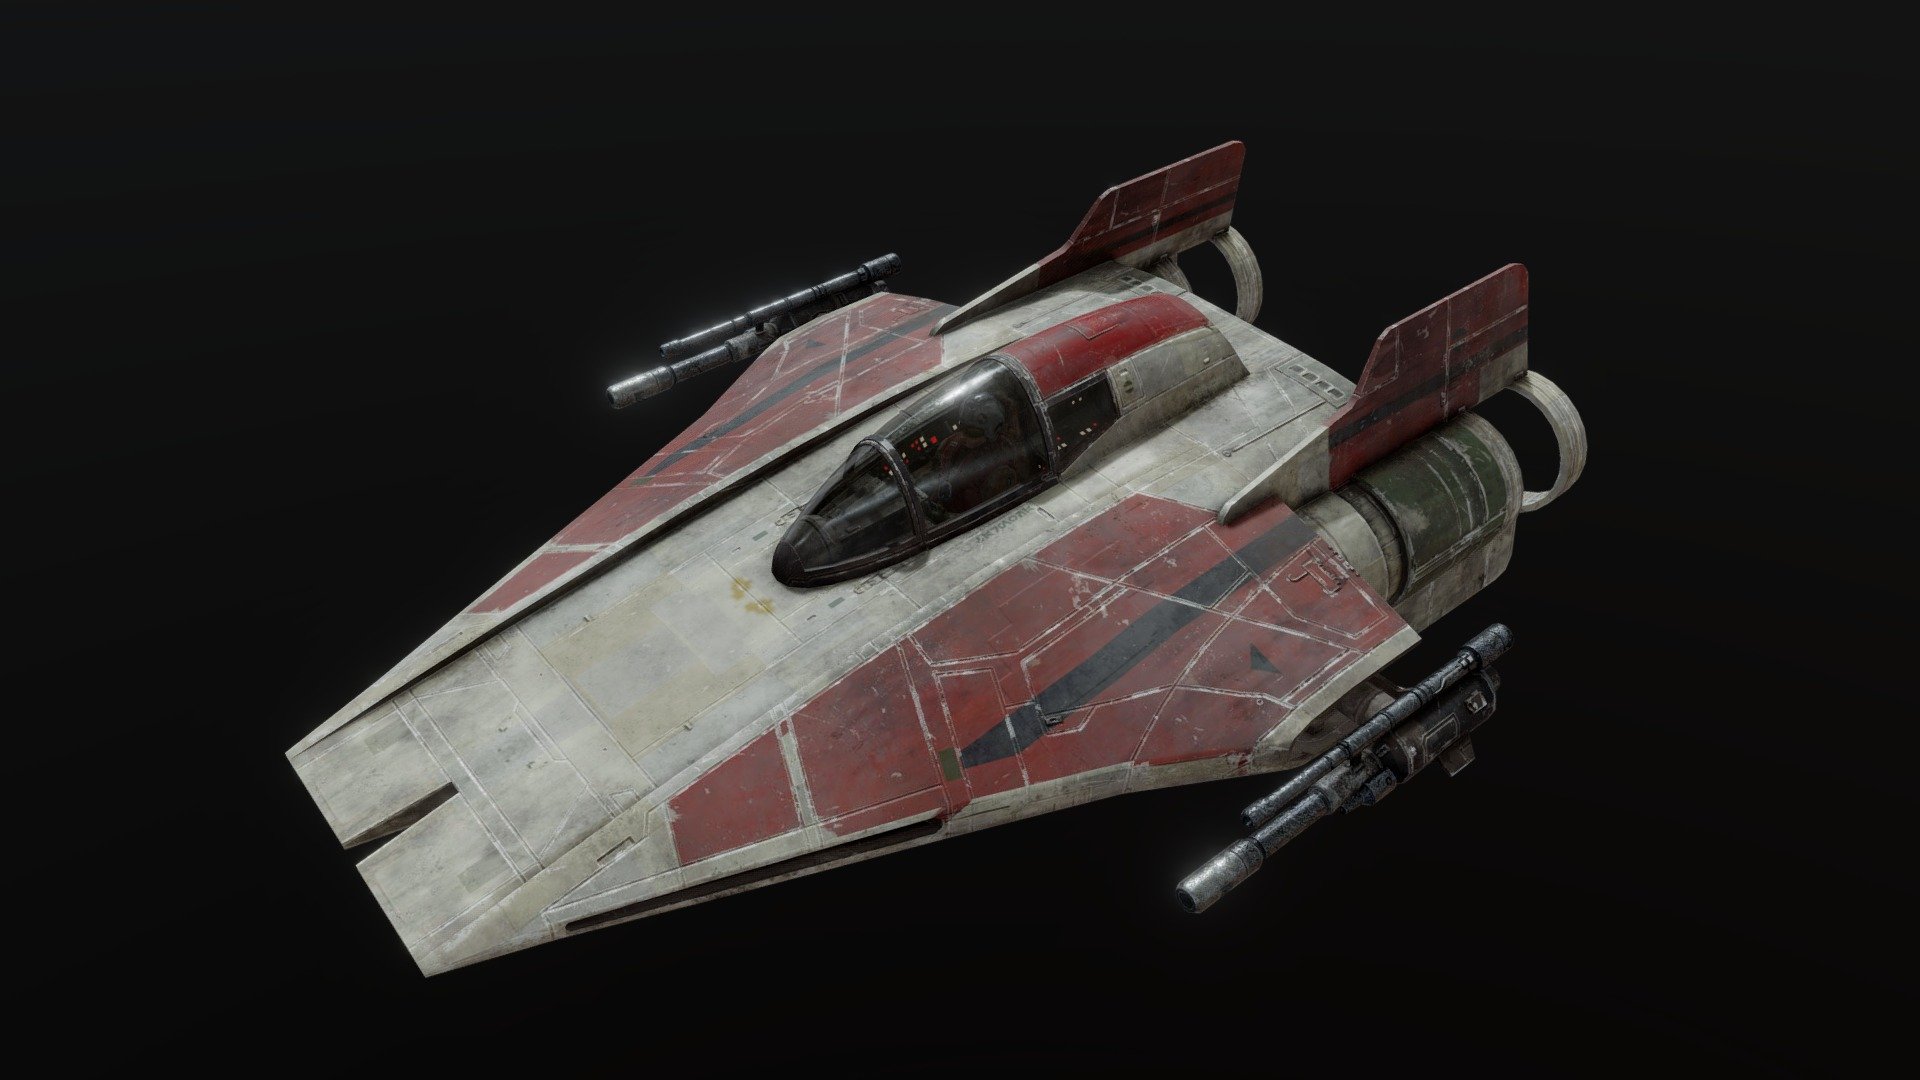 Very happy with this one- a low poly pbr model of an A-wing, somewhere in between the Star Wars: Rebels and Return of the Jedi versions, complete with a low detail cockpit interior and pilot, and some of my best textures yet. The overall proportions and colorscheme are inspired by Rebels, but the engine tips, split nose and laser cannons are more like RotJ– really this design could go anywhere in the post-Clone Wars timeline.

The glass material uses the same textures as the hull, so if you had a huge fleet and wanted to improve performance, you can apply the hull material to the whole thing to have opaque black shiny glass, and then you could delete the pilot too to save on his material. On the other hand, if you want to get fancier and add some refraction to the glass, the glass pieces are their own separate elements, so it is easy to select them and add a little bit of thickness with a shell/solidify modifier in your 3D software of choice. Some lights in the engines will also make it look fancier. Enjoy! - Star Wars A-wing (Rebels/RotJ design cross) - Buy Royalty Free 3D model by Robear (@xiaorobear) 3d model